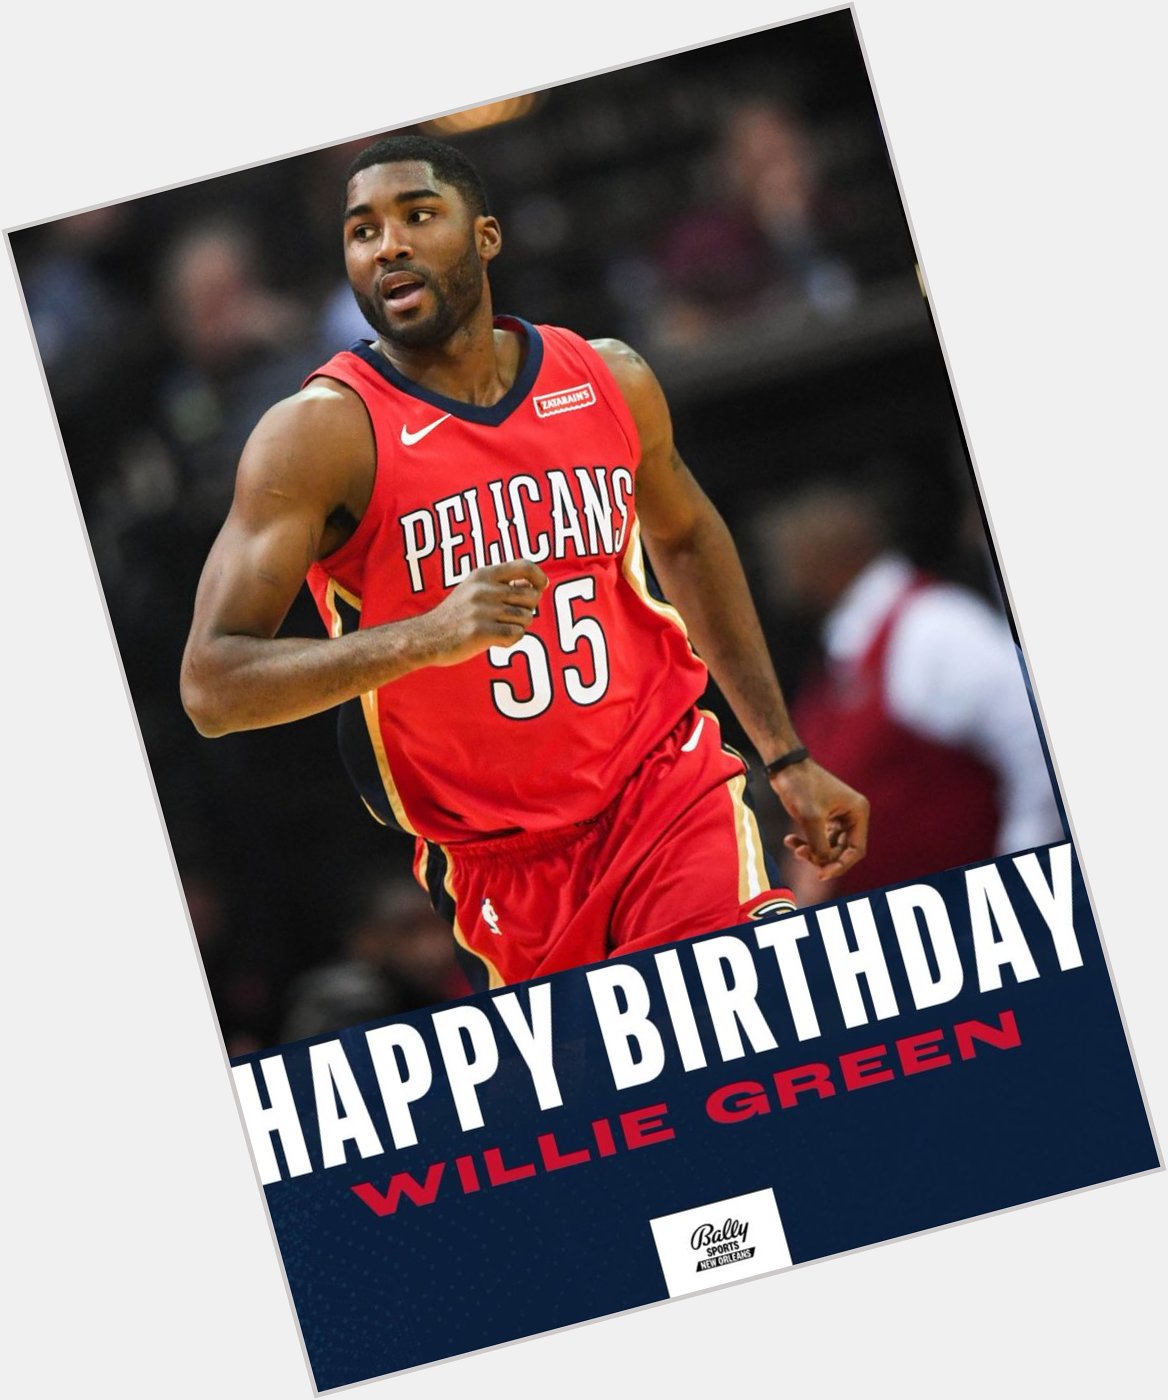 Happy birthday to former player and current coach, Willie Green!! 